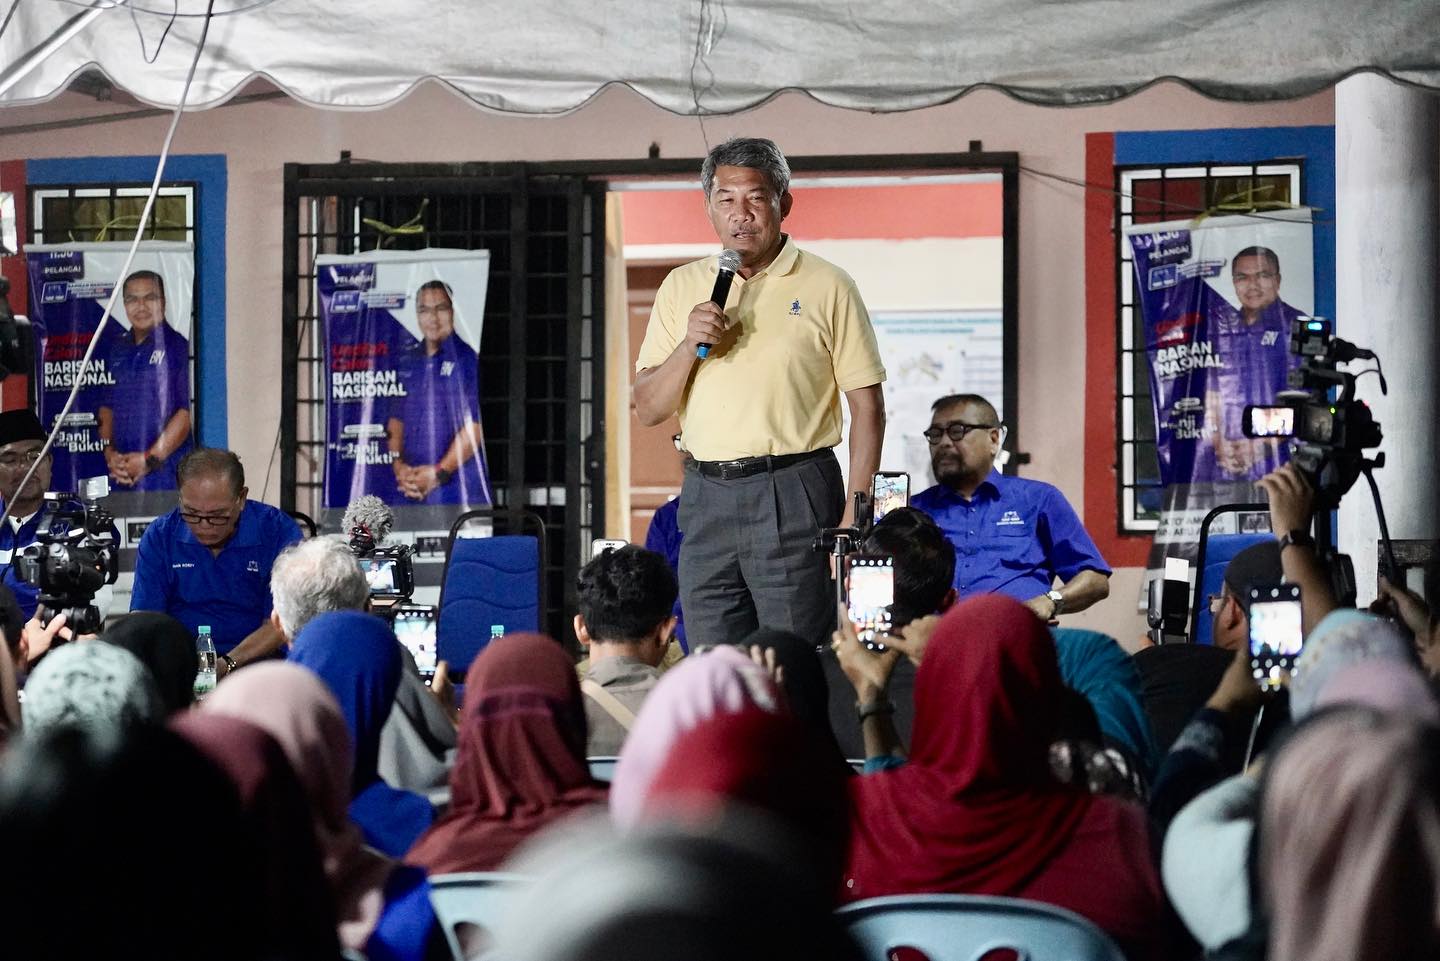 Pelangai polls a start for BN to prepare for GE16 battle: Mohamad Hasan